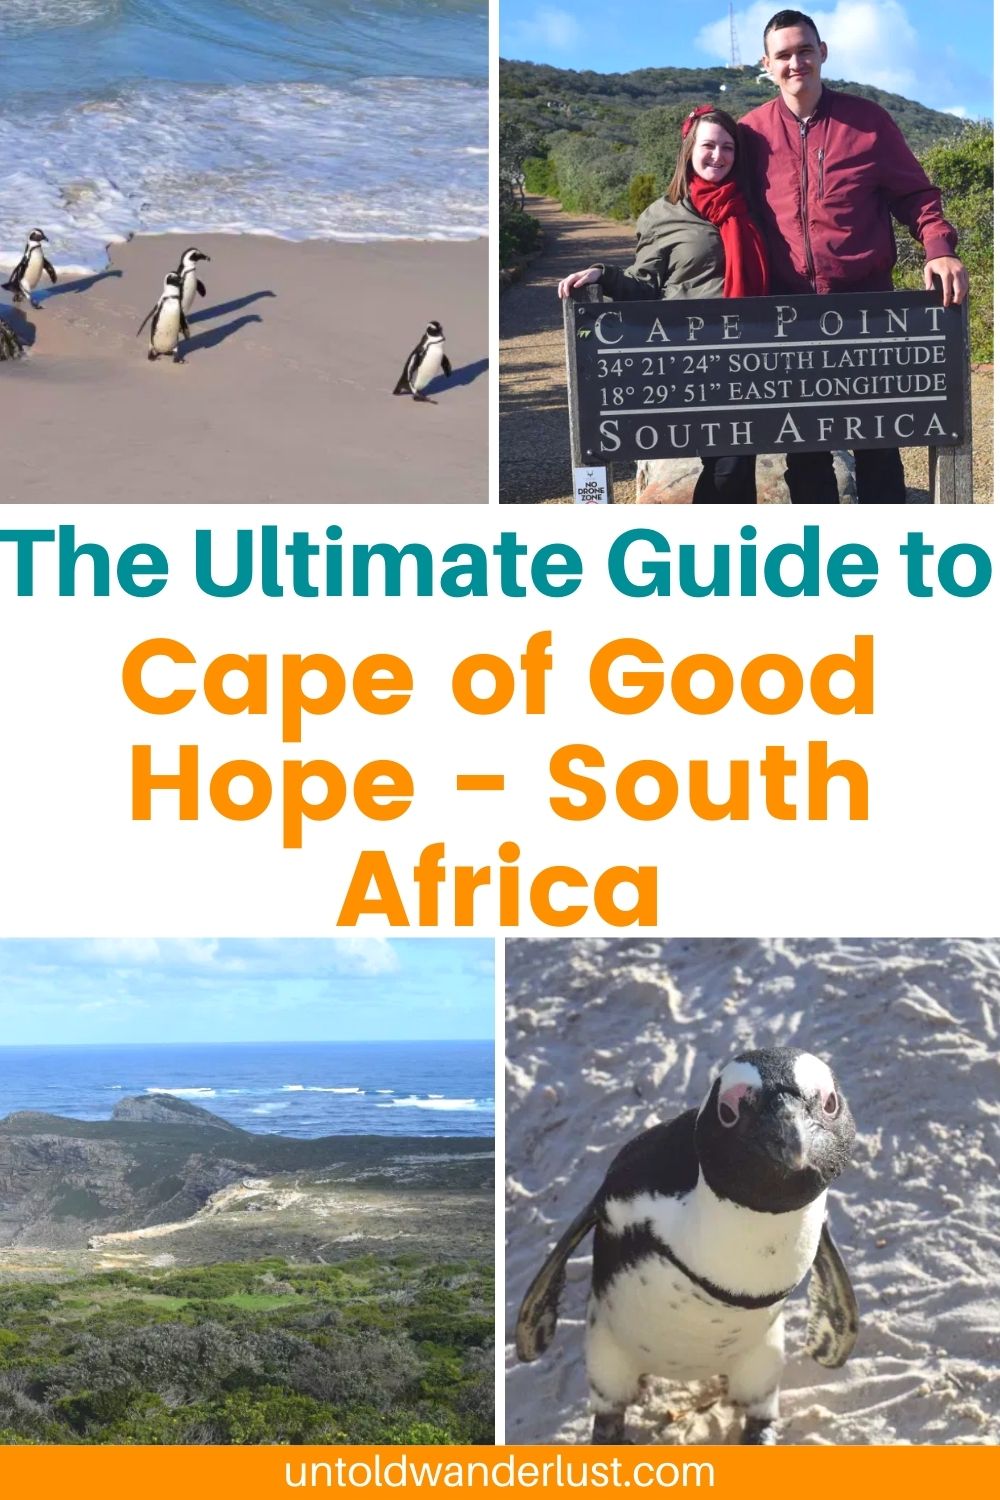 The Ultimate Cape of Good Hope Tour, South Africa Guide